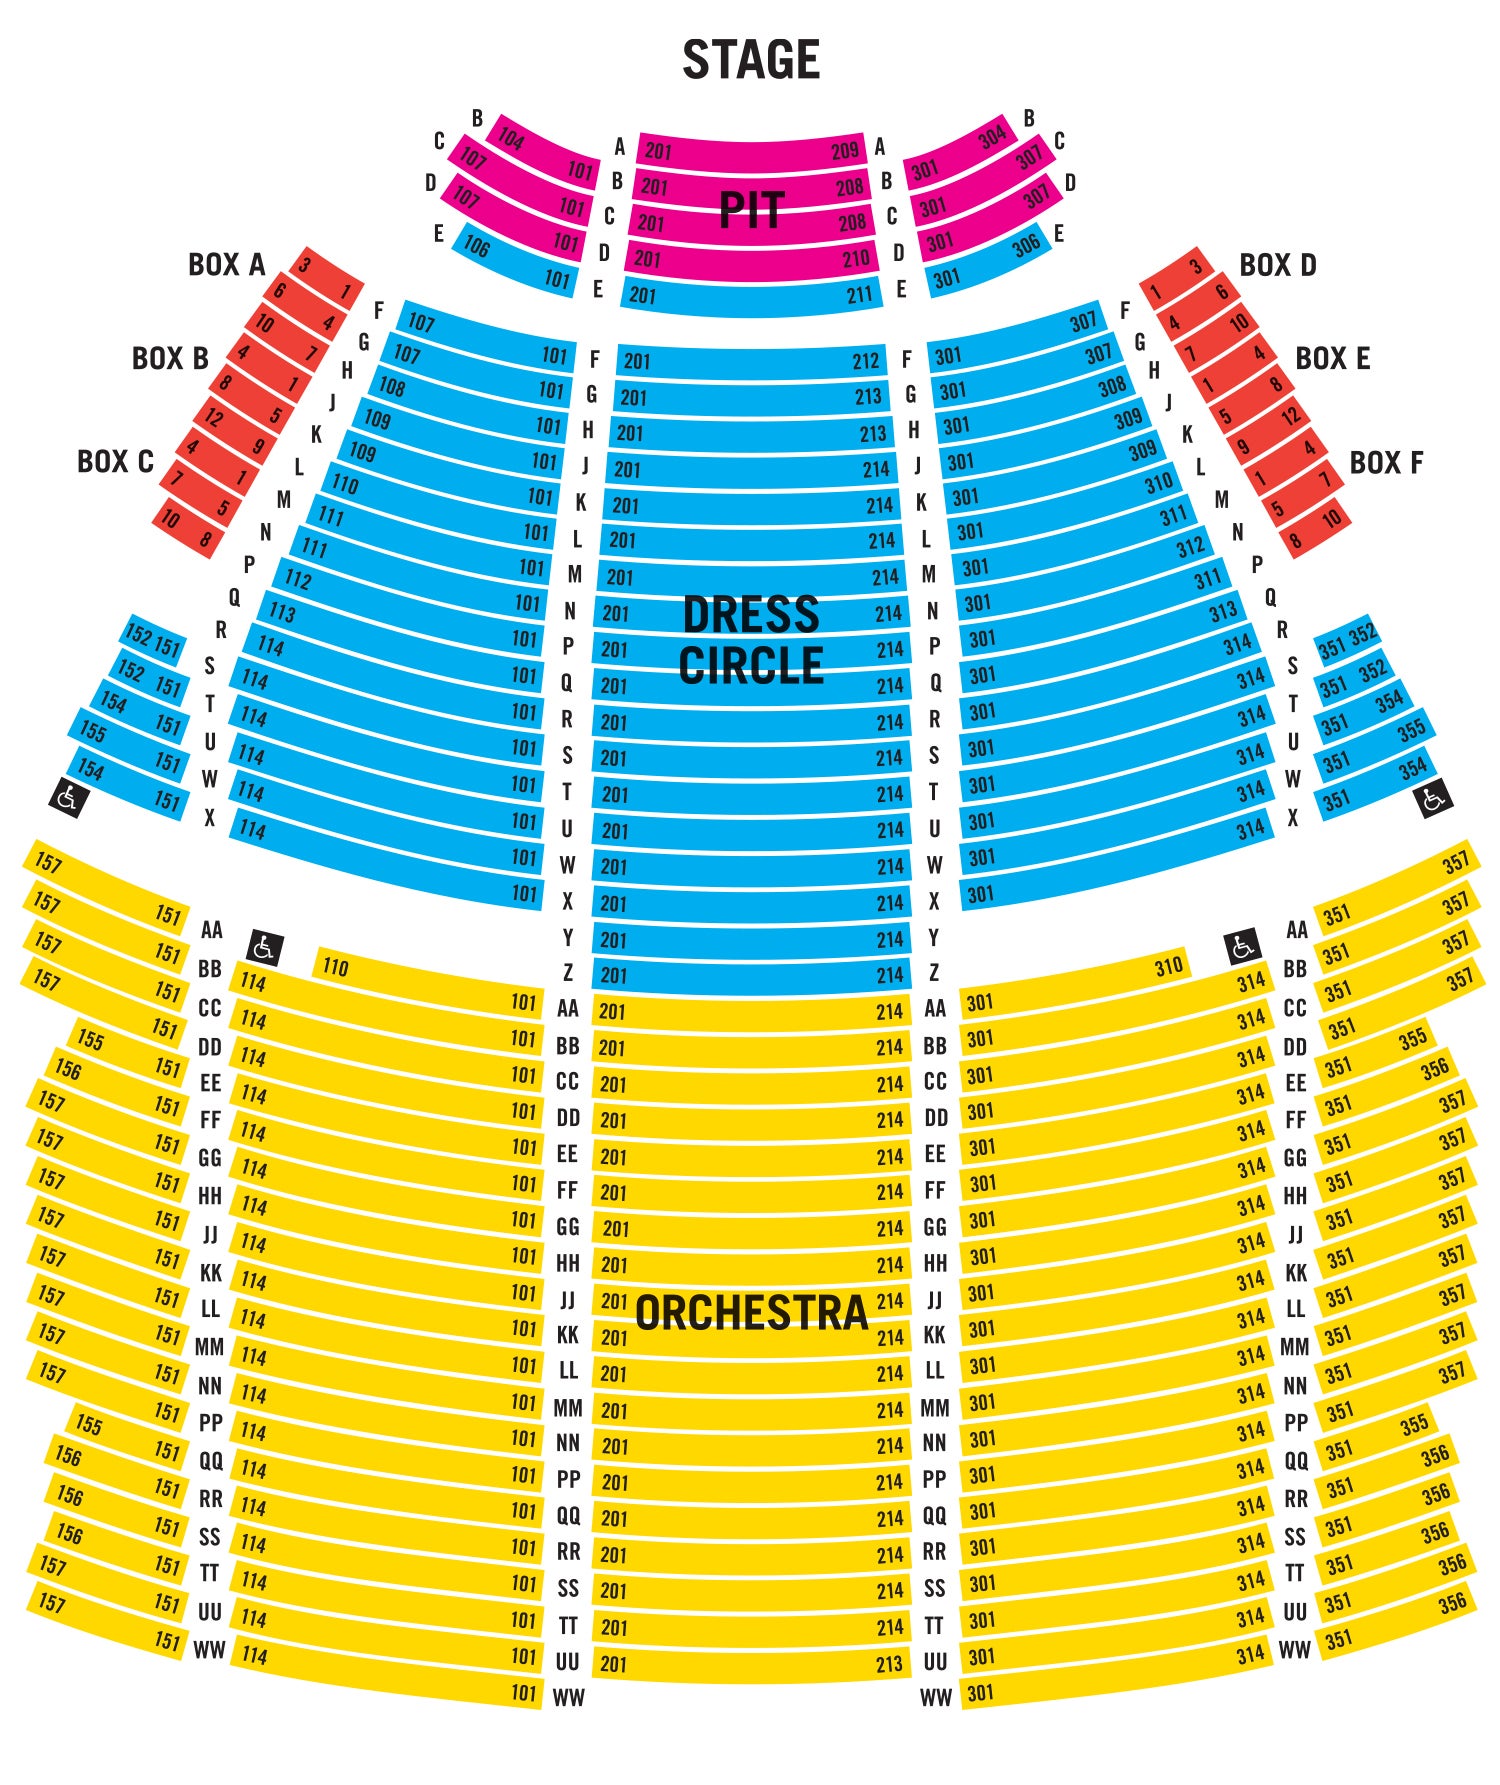 Sondheim Theatre London seat map and prices for Les Miserables